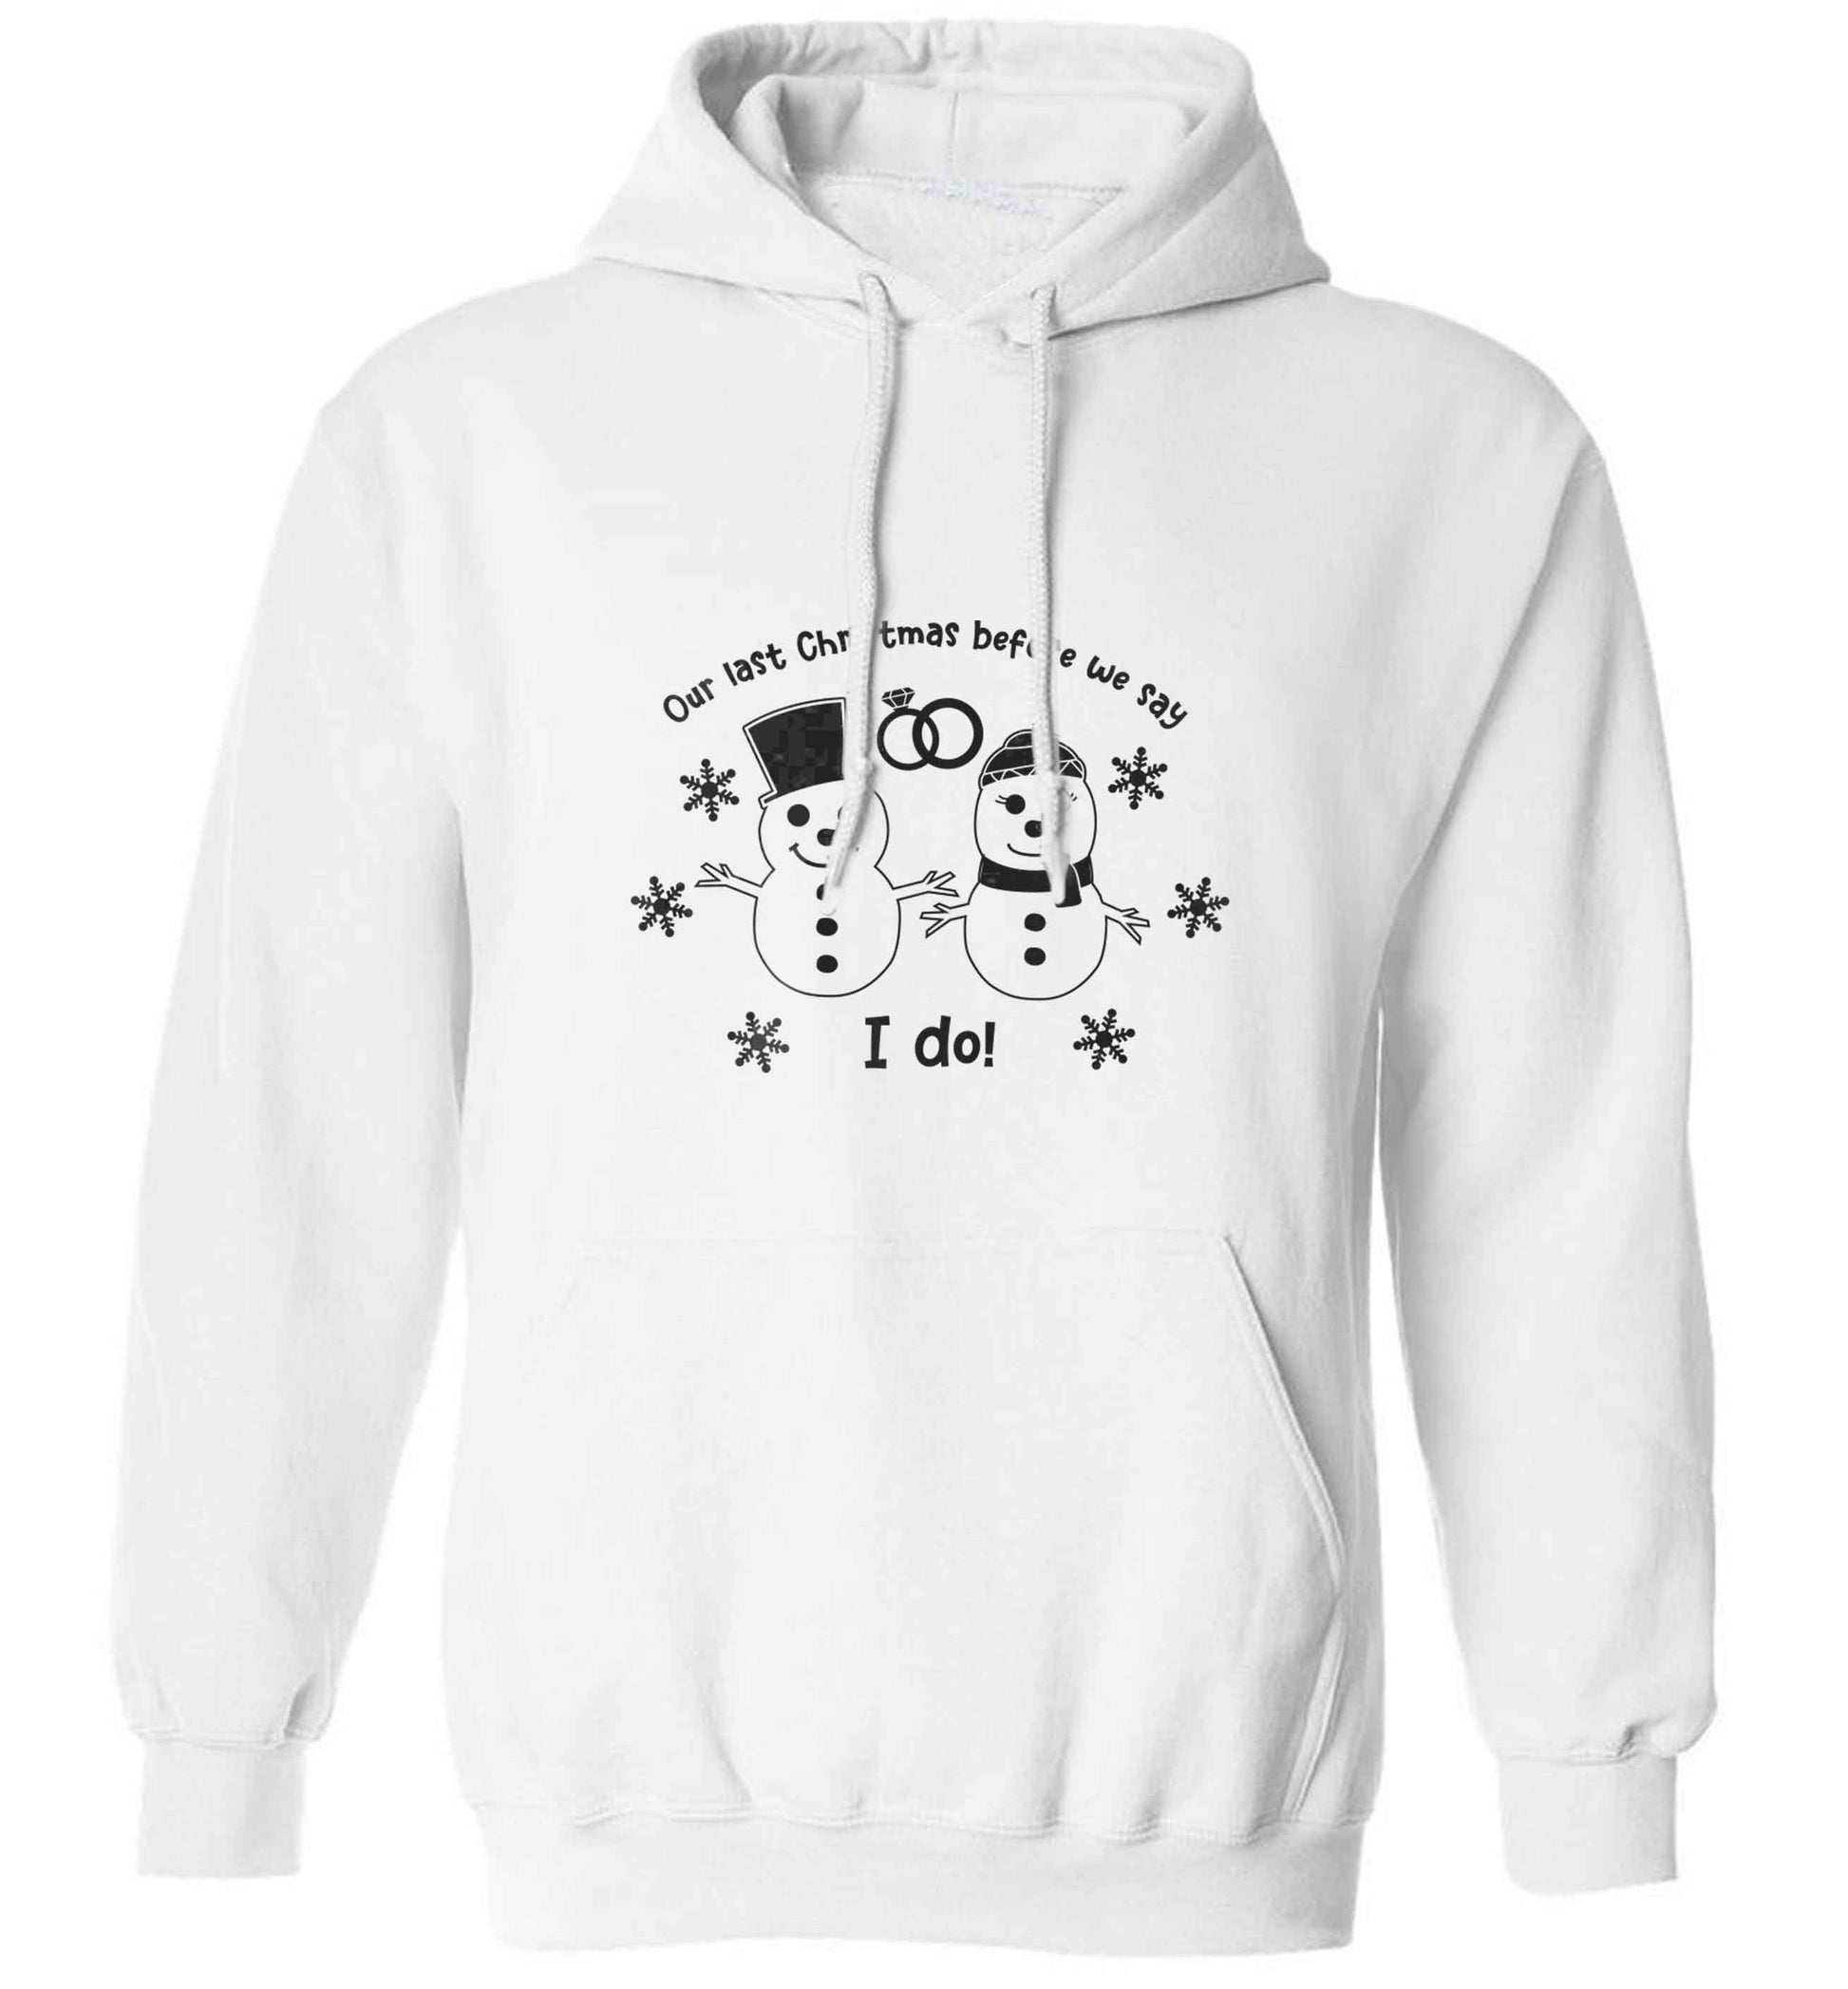 Last Christmas before we say I do adults unisex white hoodie 2XL